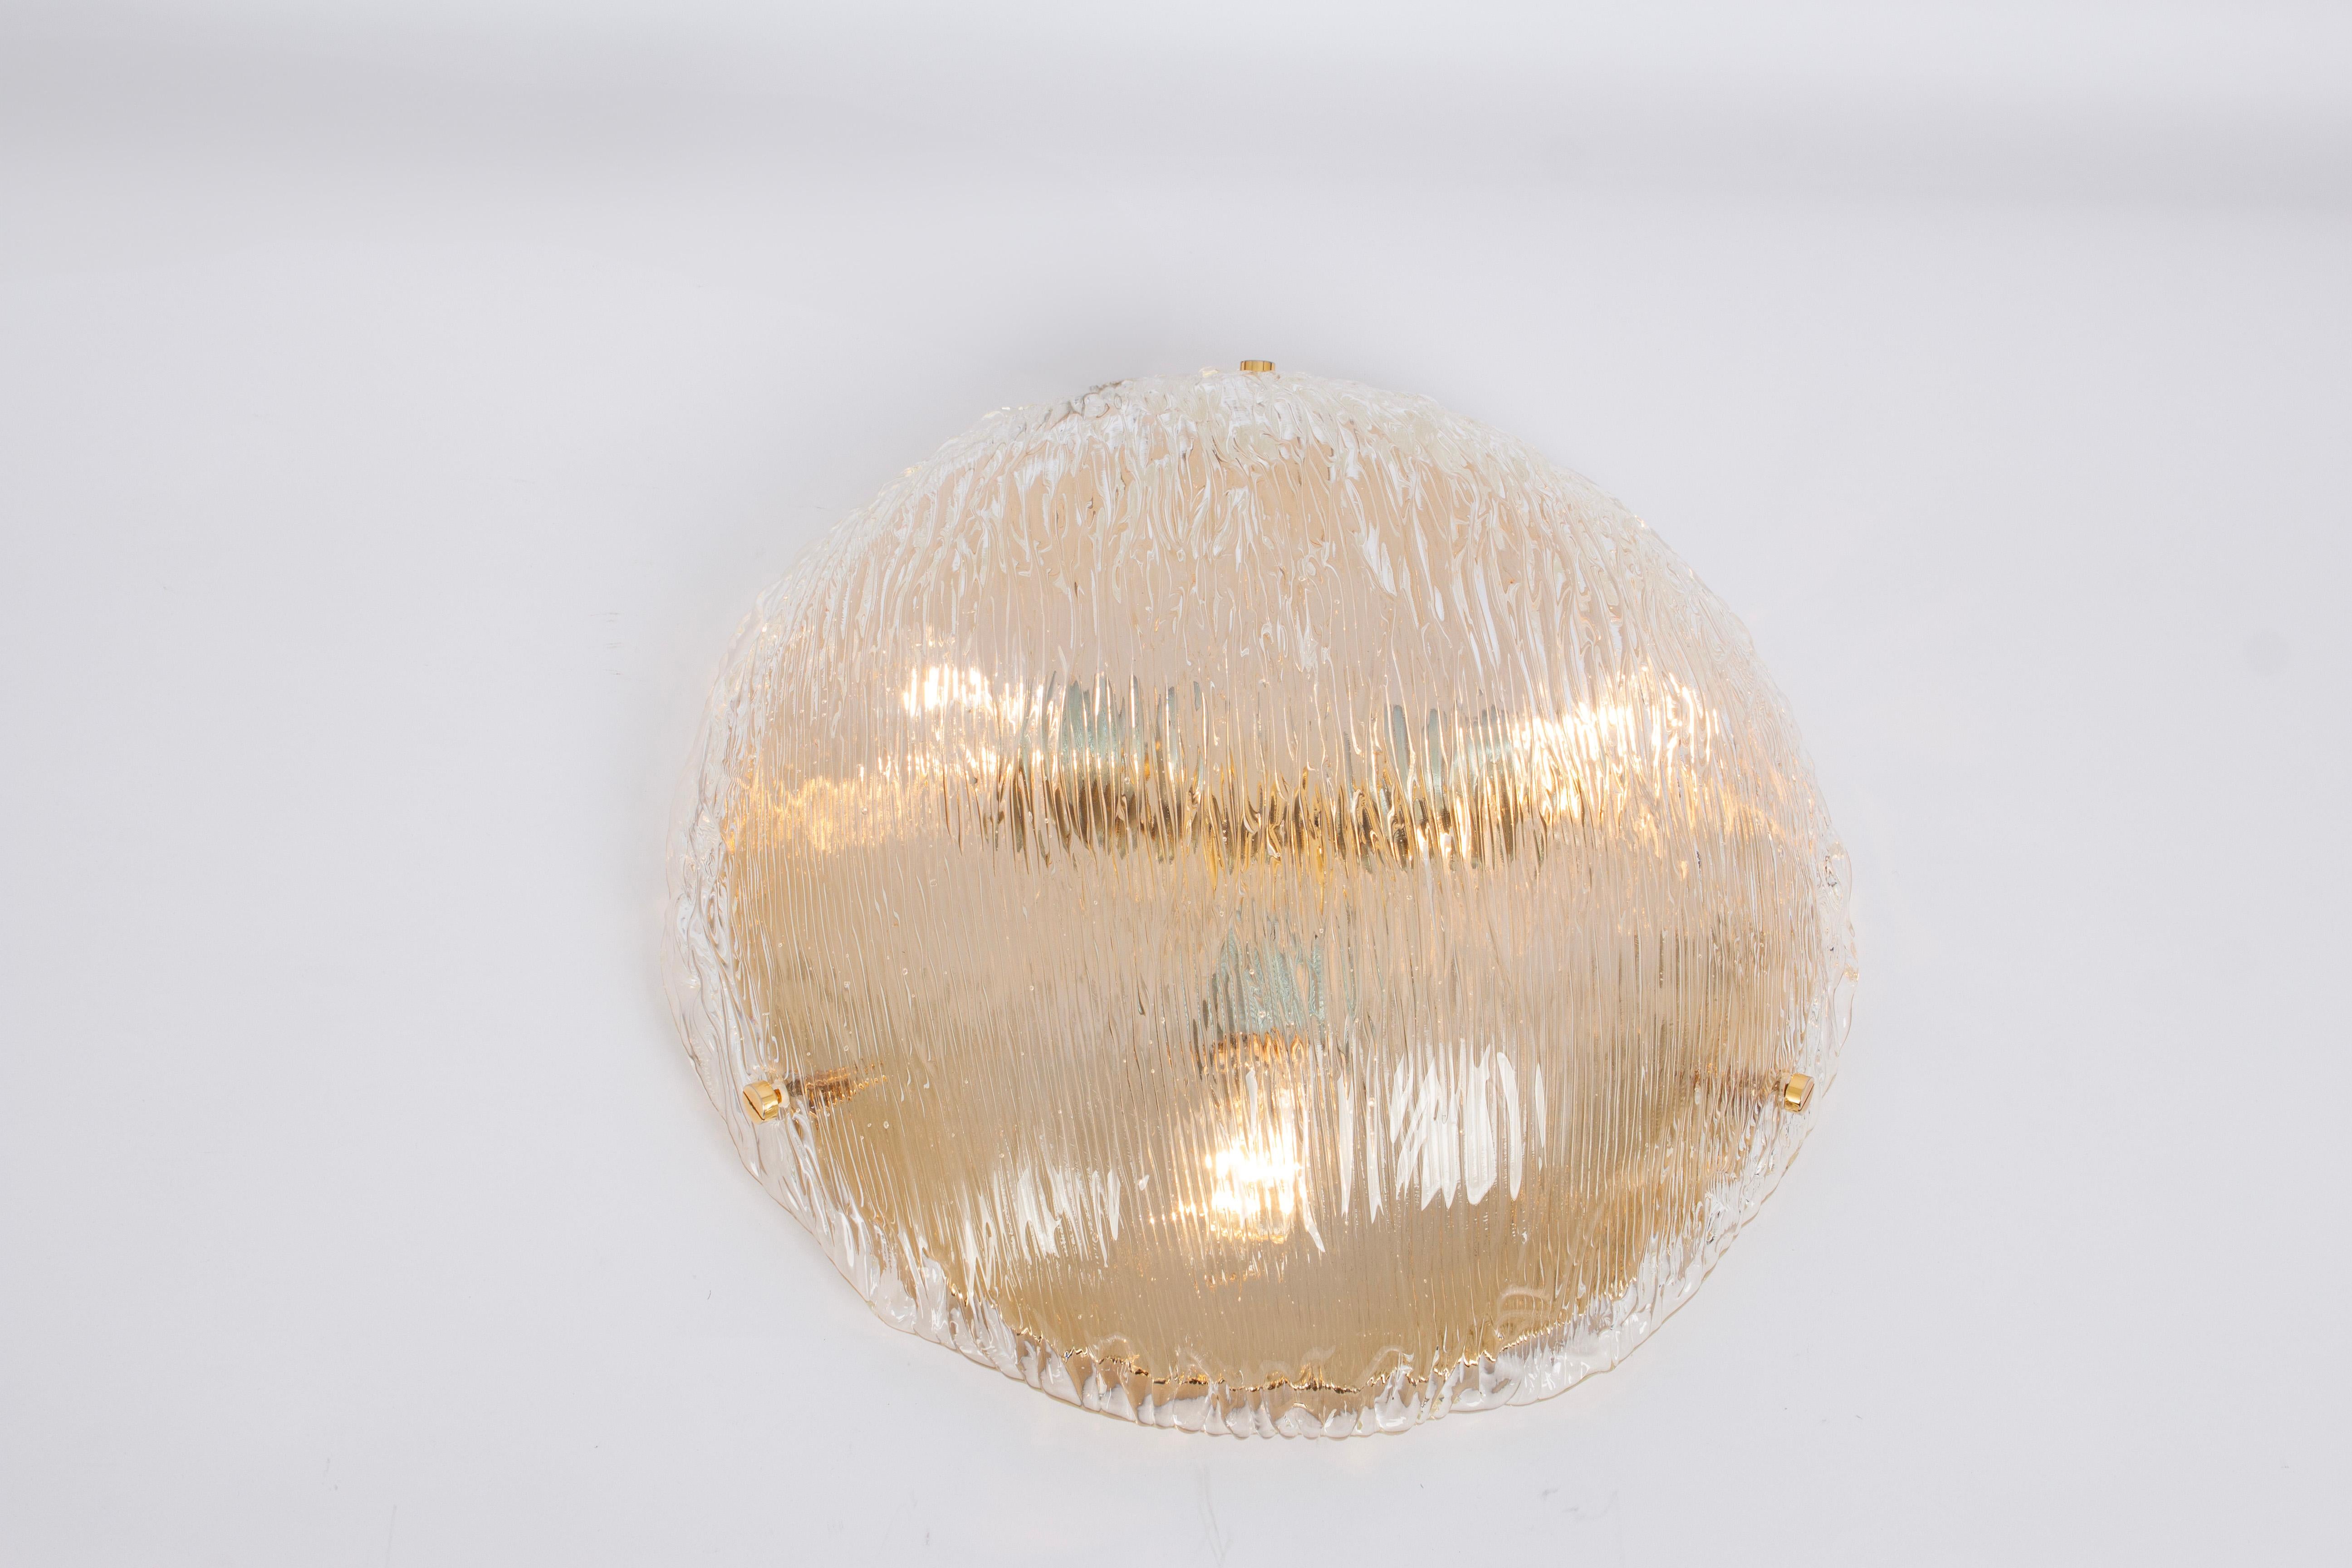 Mid-Century Modern Large Venini Ceiling Lights Attributed to Carlo Scarpa for Venini, 1950s For Sale